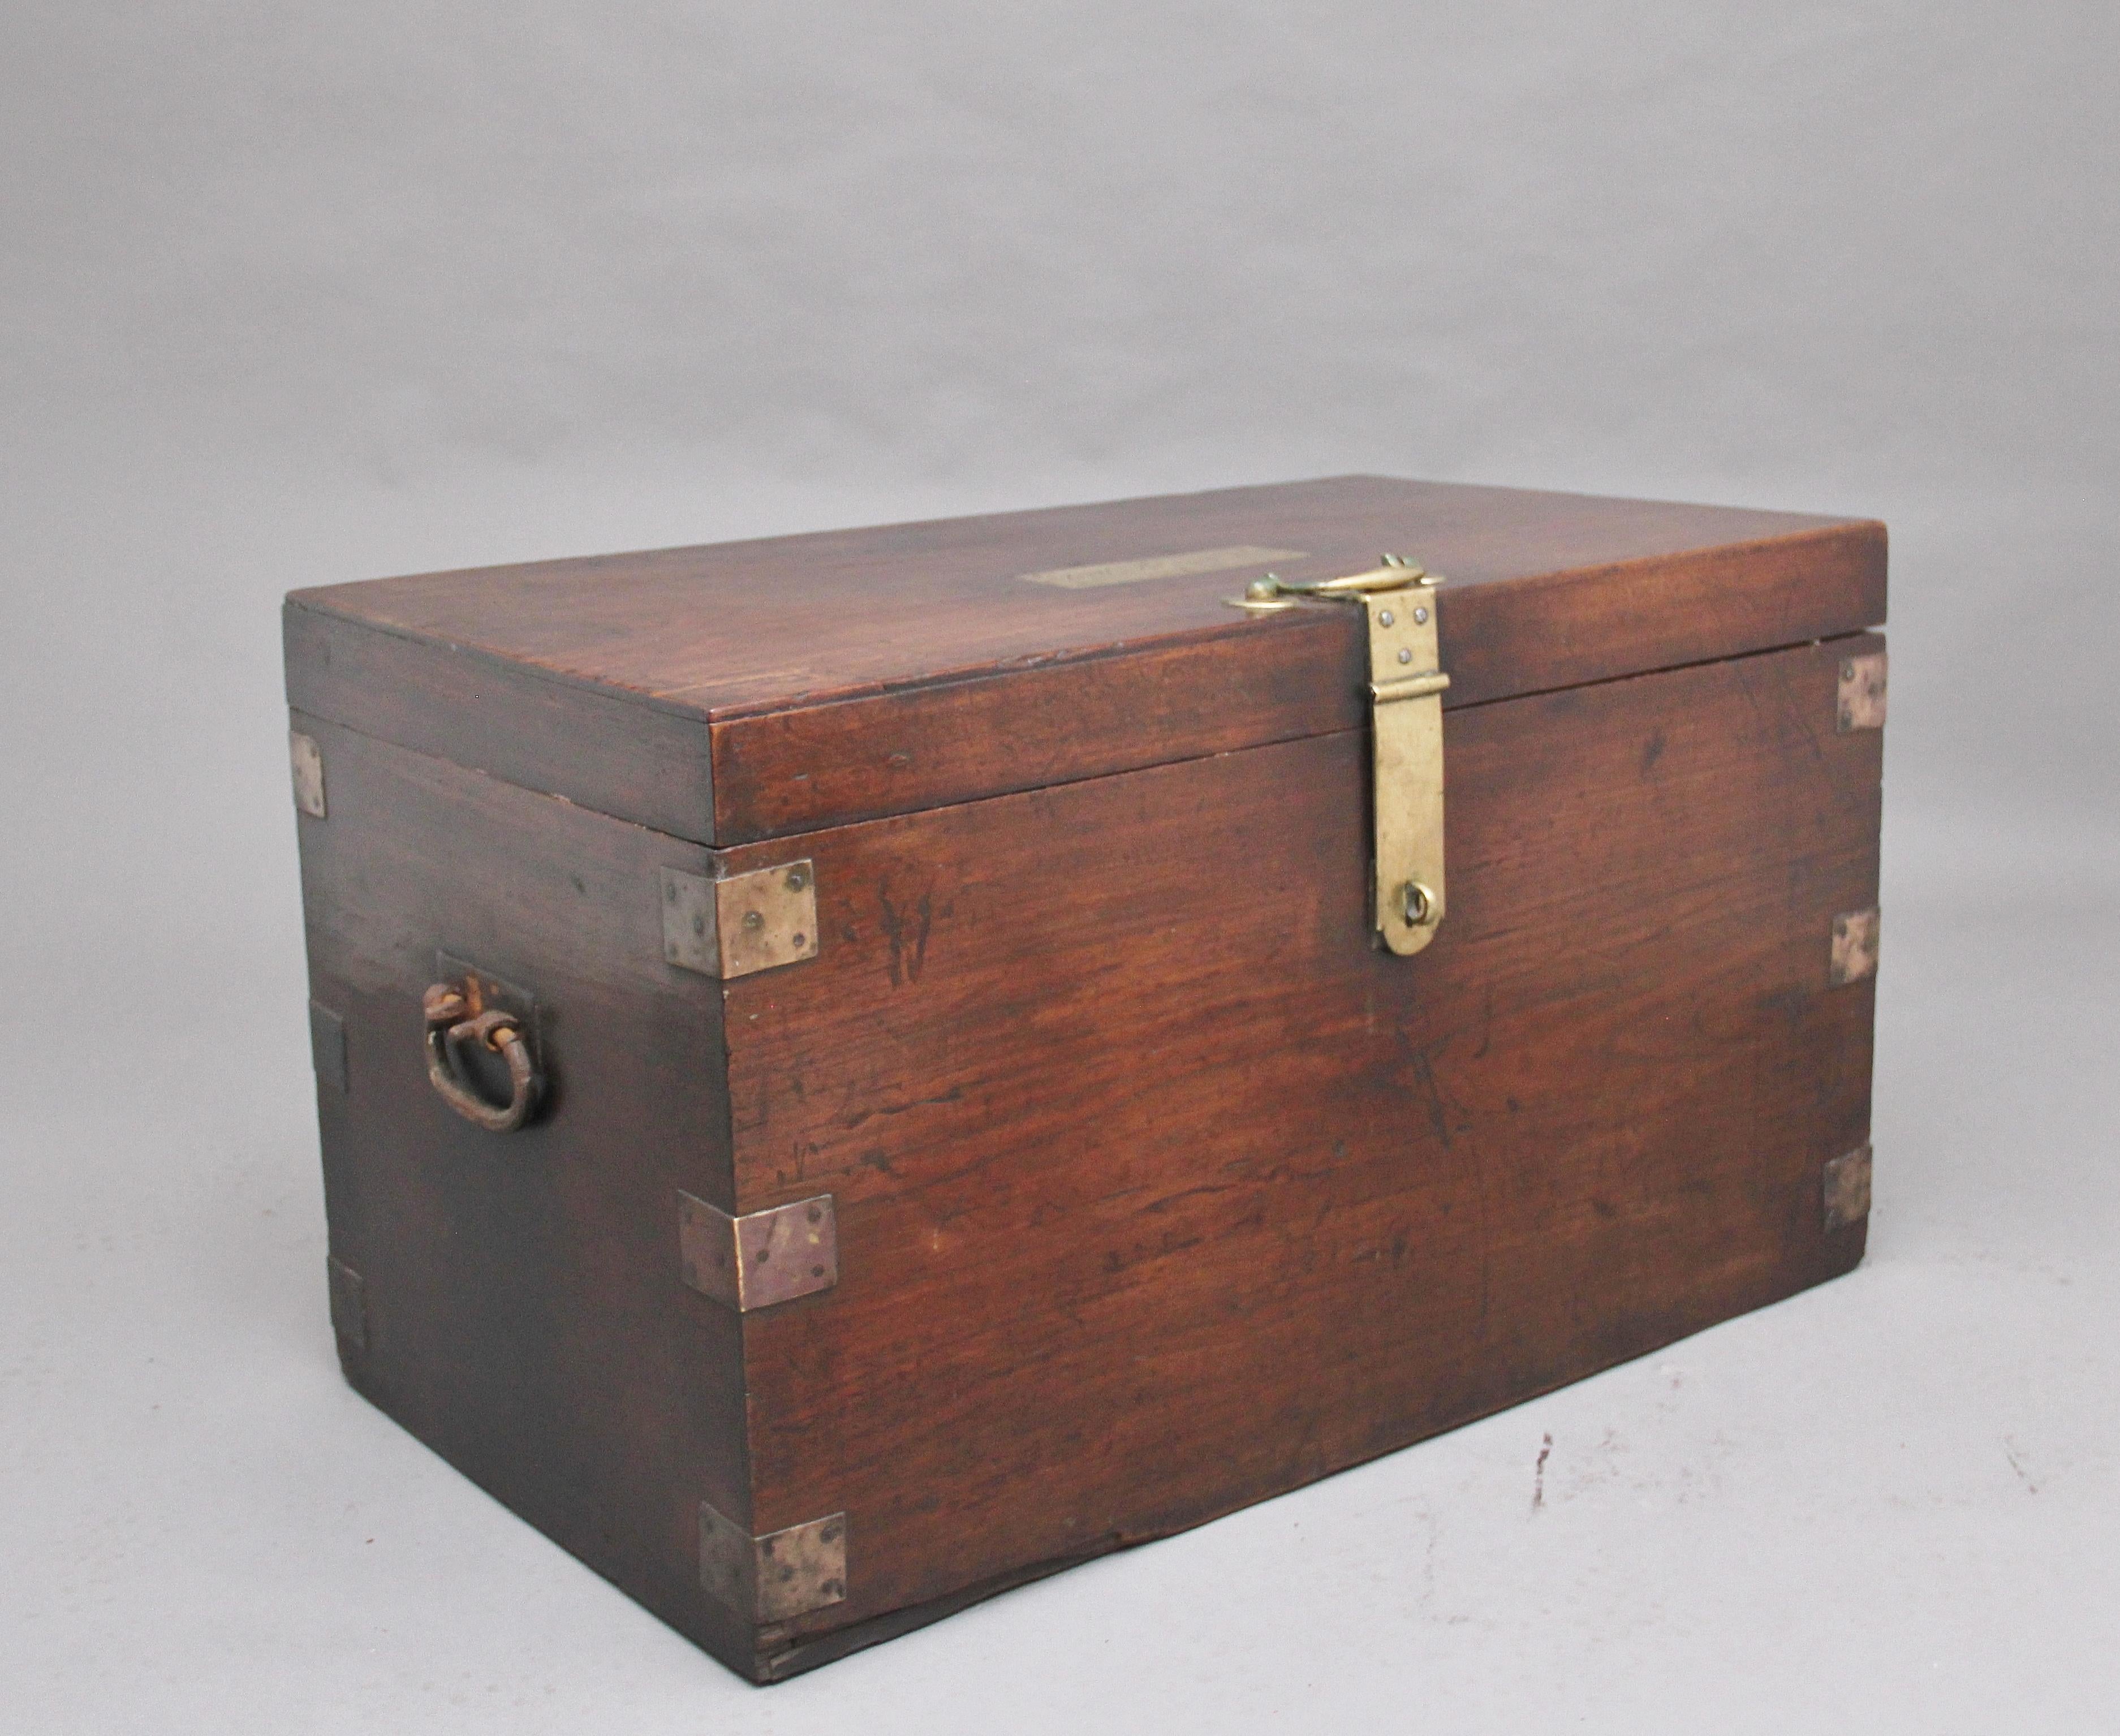 19th century teak and brass bound military / campaign trunk with iron carrying handles on the sides and a lovely brass hasp on the top and front with a handle on the top to open it with. The top has a brass plaque marked “J M Bennett” and the date